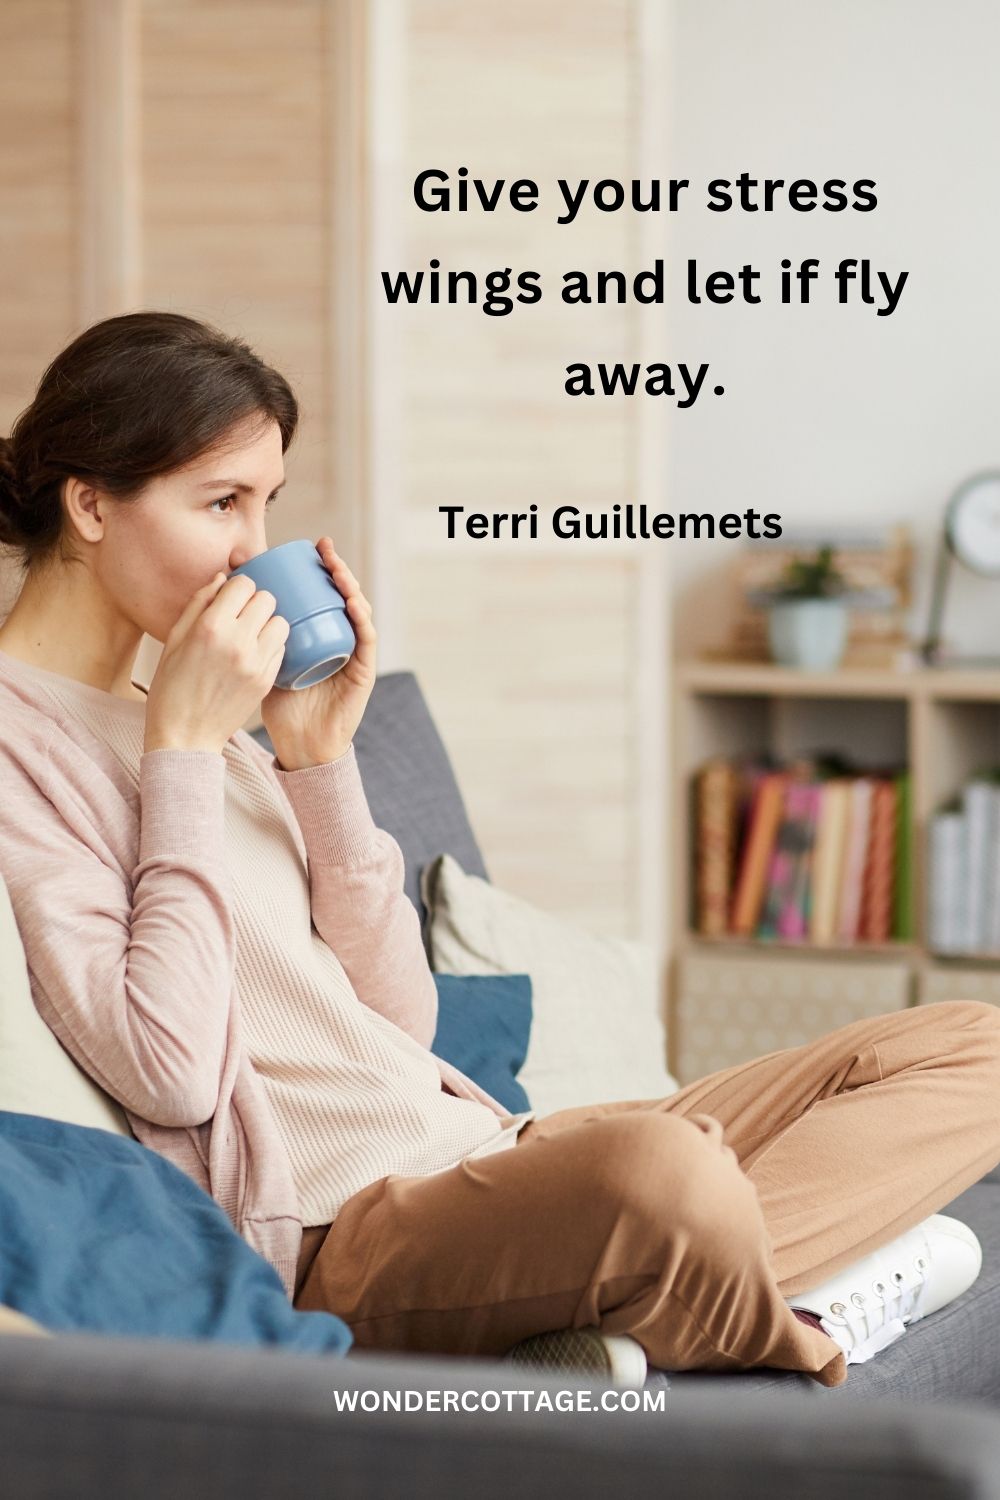 Give your stress wings and let if fly away. Terri Guillemets